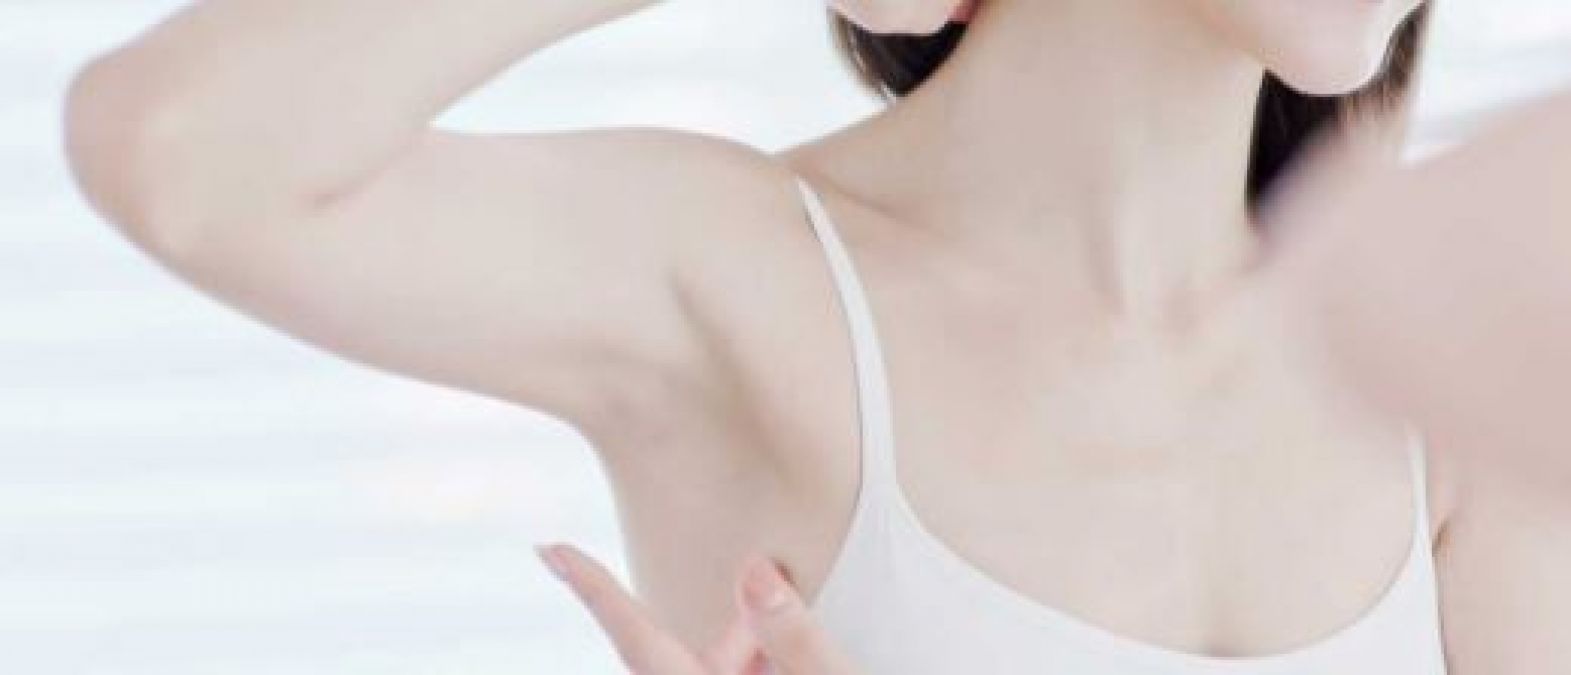 Hesitation due to smell of underarms, then baking soda is the solution